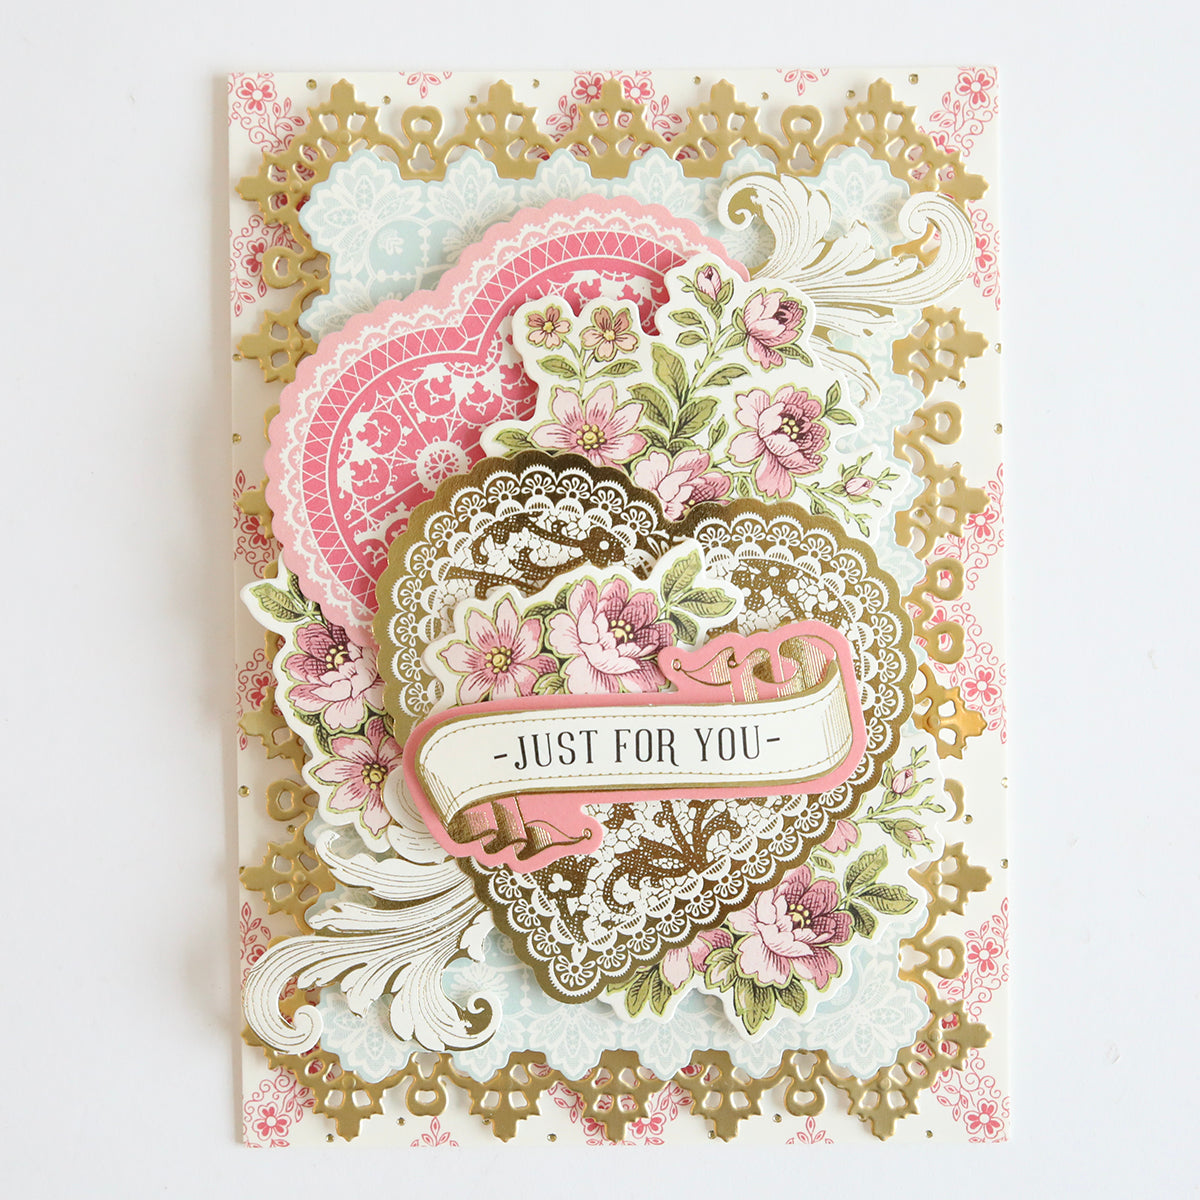 A vintage Valentine's card adorned with delicate pink flowers and Lace Doily Embellishments for added dimension and texture.